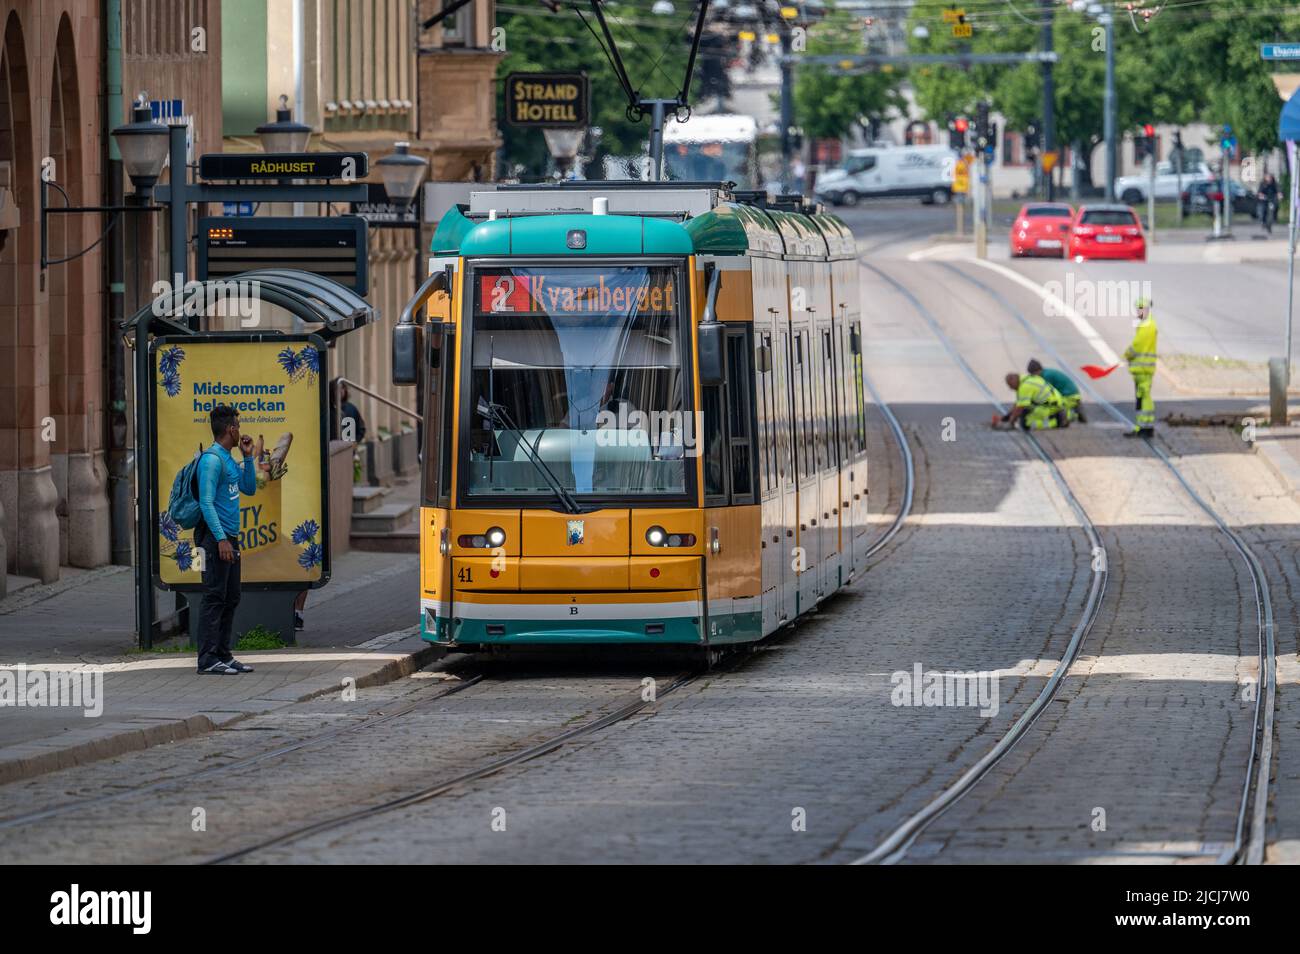 Tram on main street Drottninggatan in the city center of Norrkoping, Sweden. Norrkoping is a historic industrial town. Stock Photo